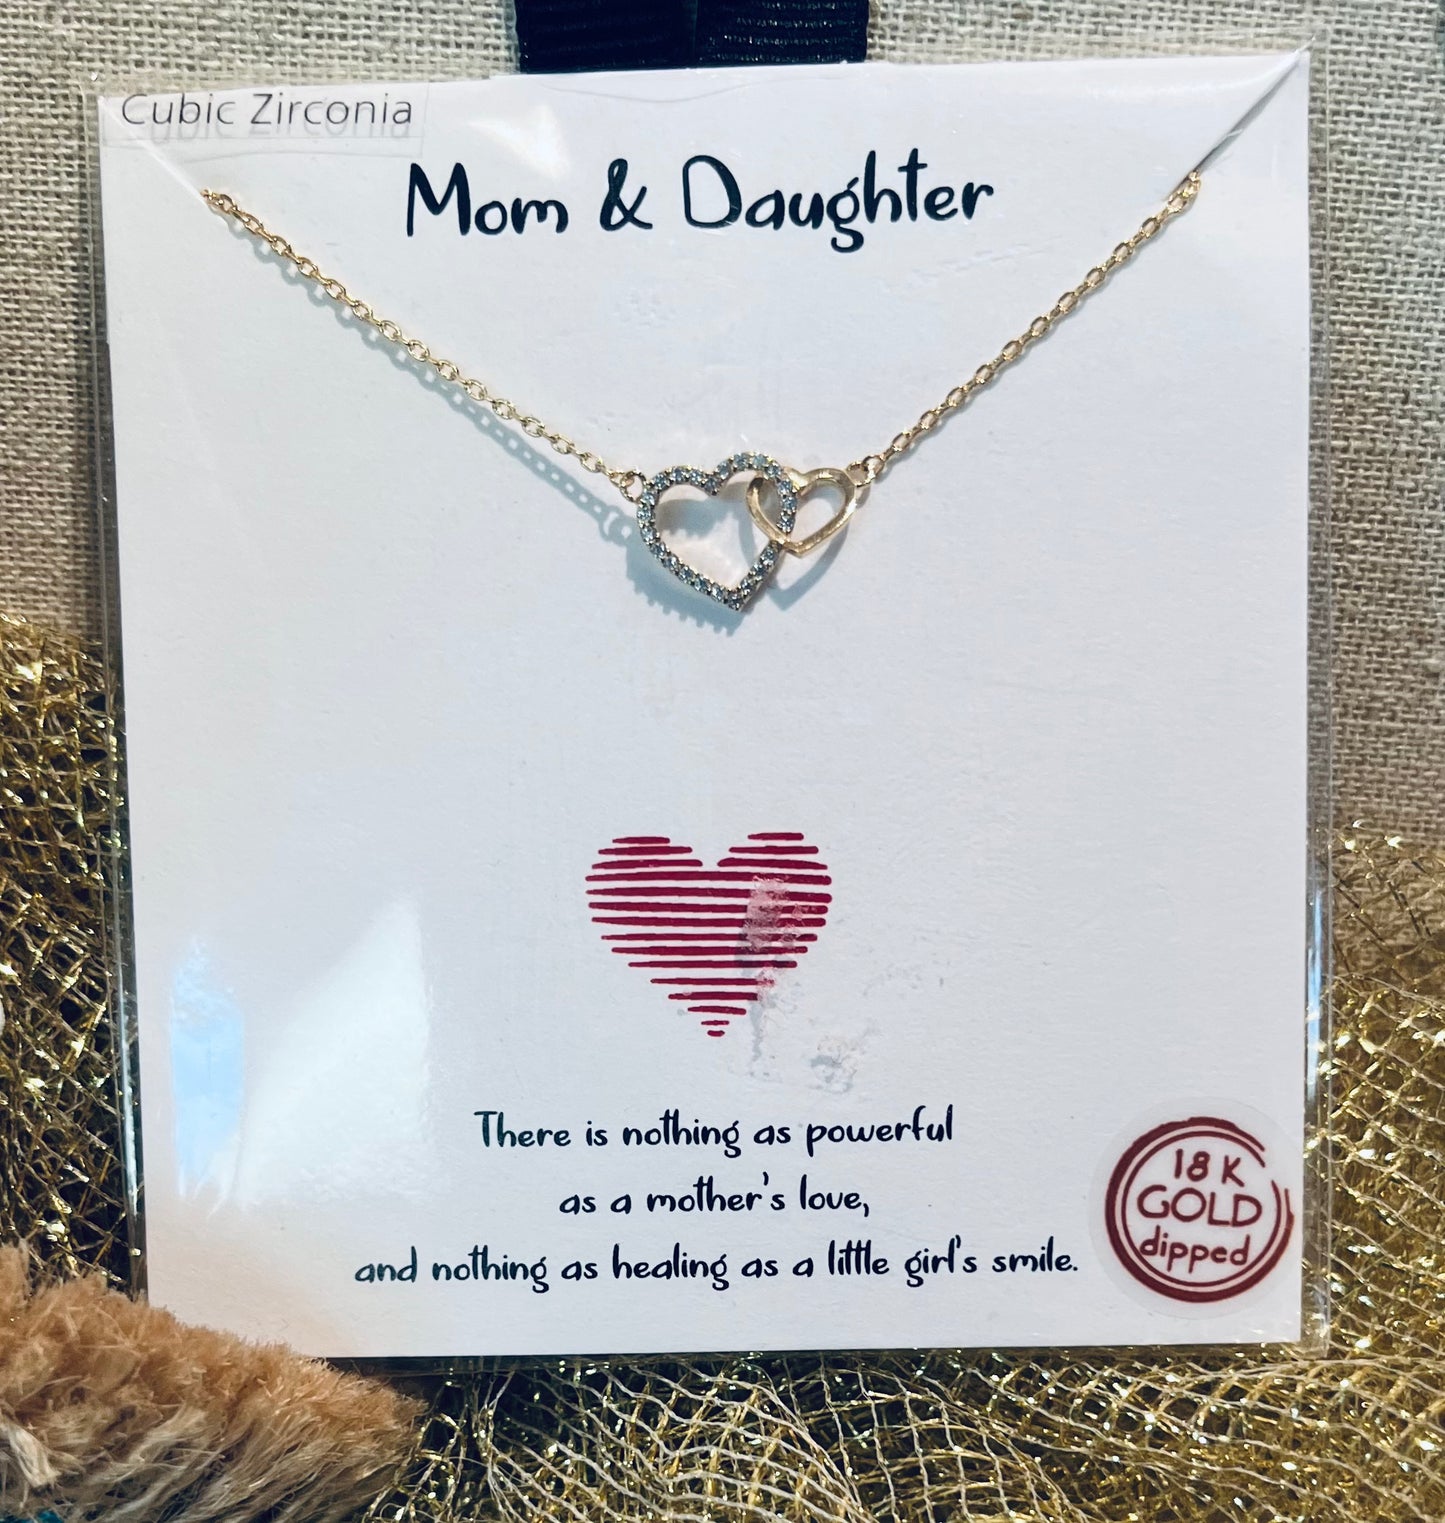 Mom and daughter necklace